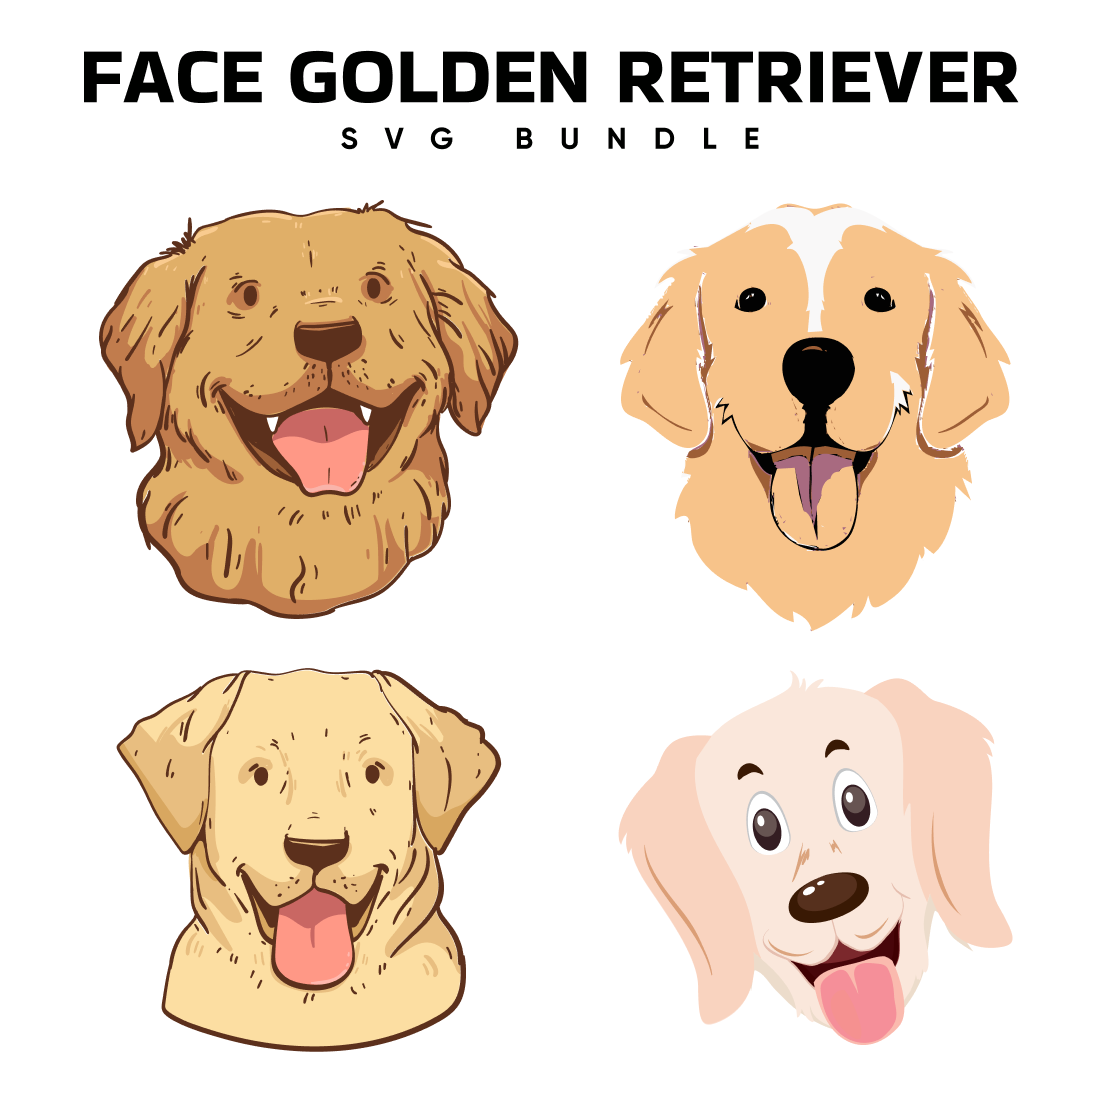 Set of four dog faces with the words face golden retriever svg bundle.